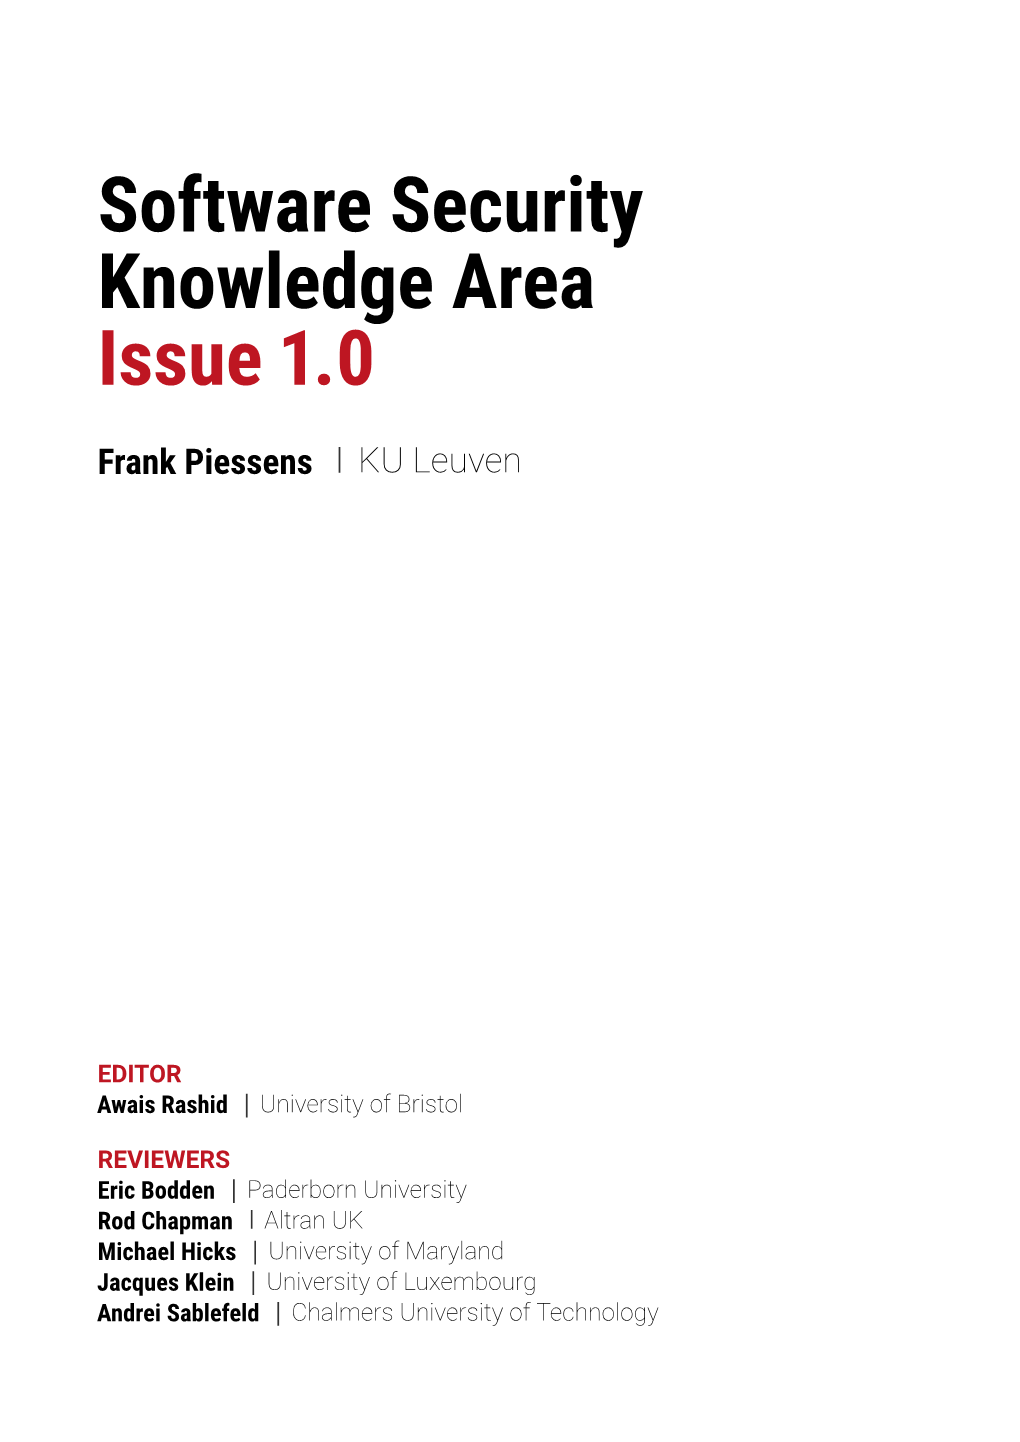 Software Security Knowledge Area Issue 1.0